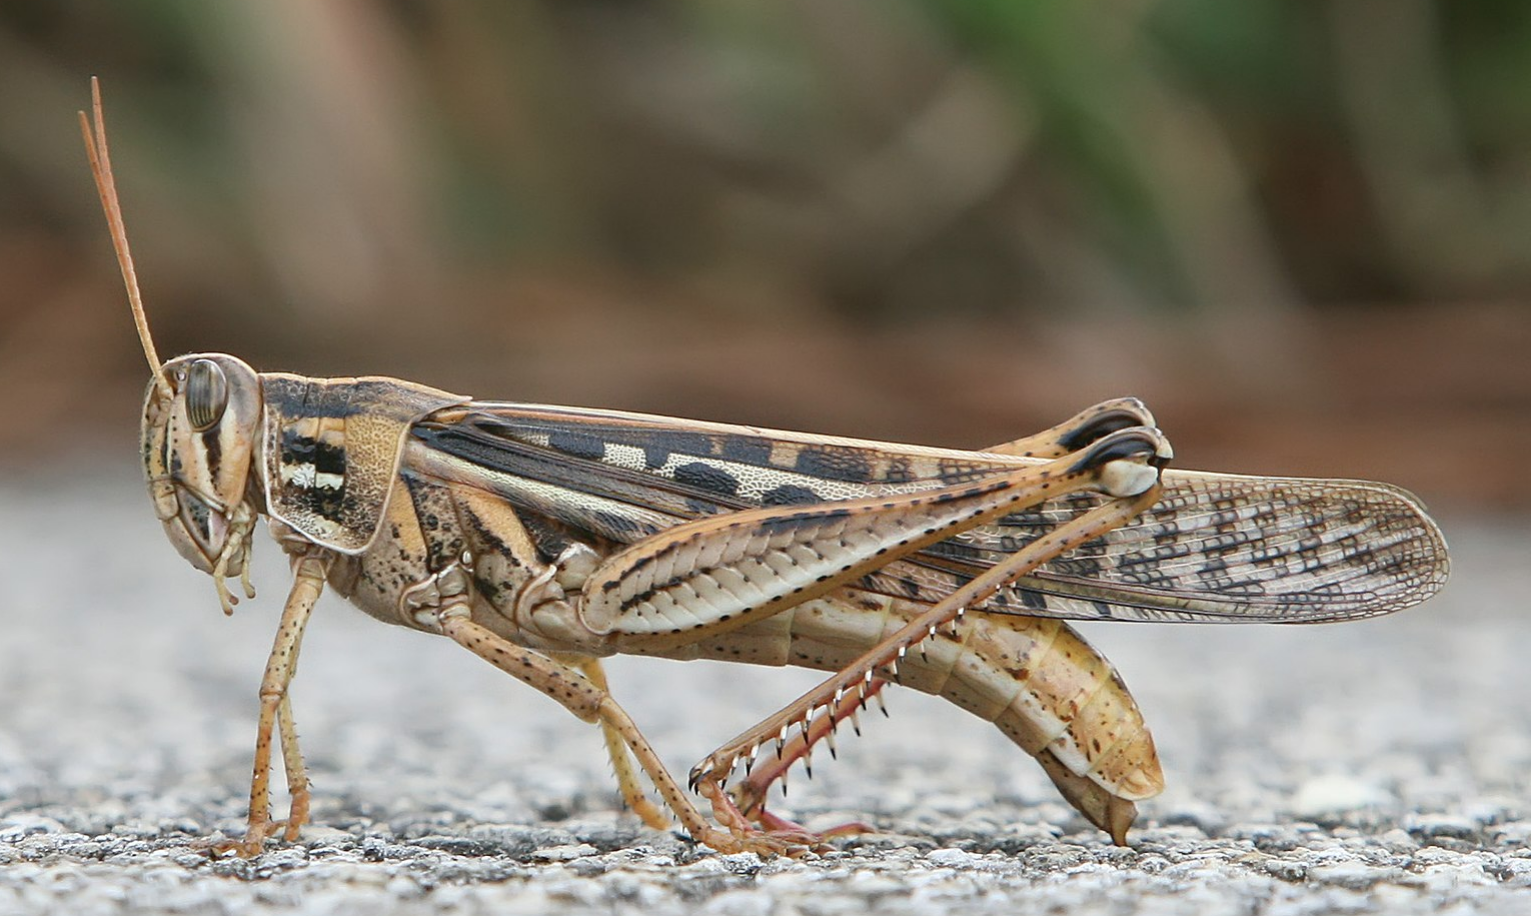 The Grasshoppers are Coming for your Savings